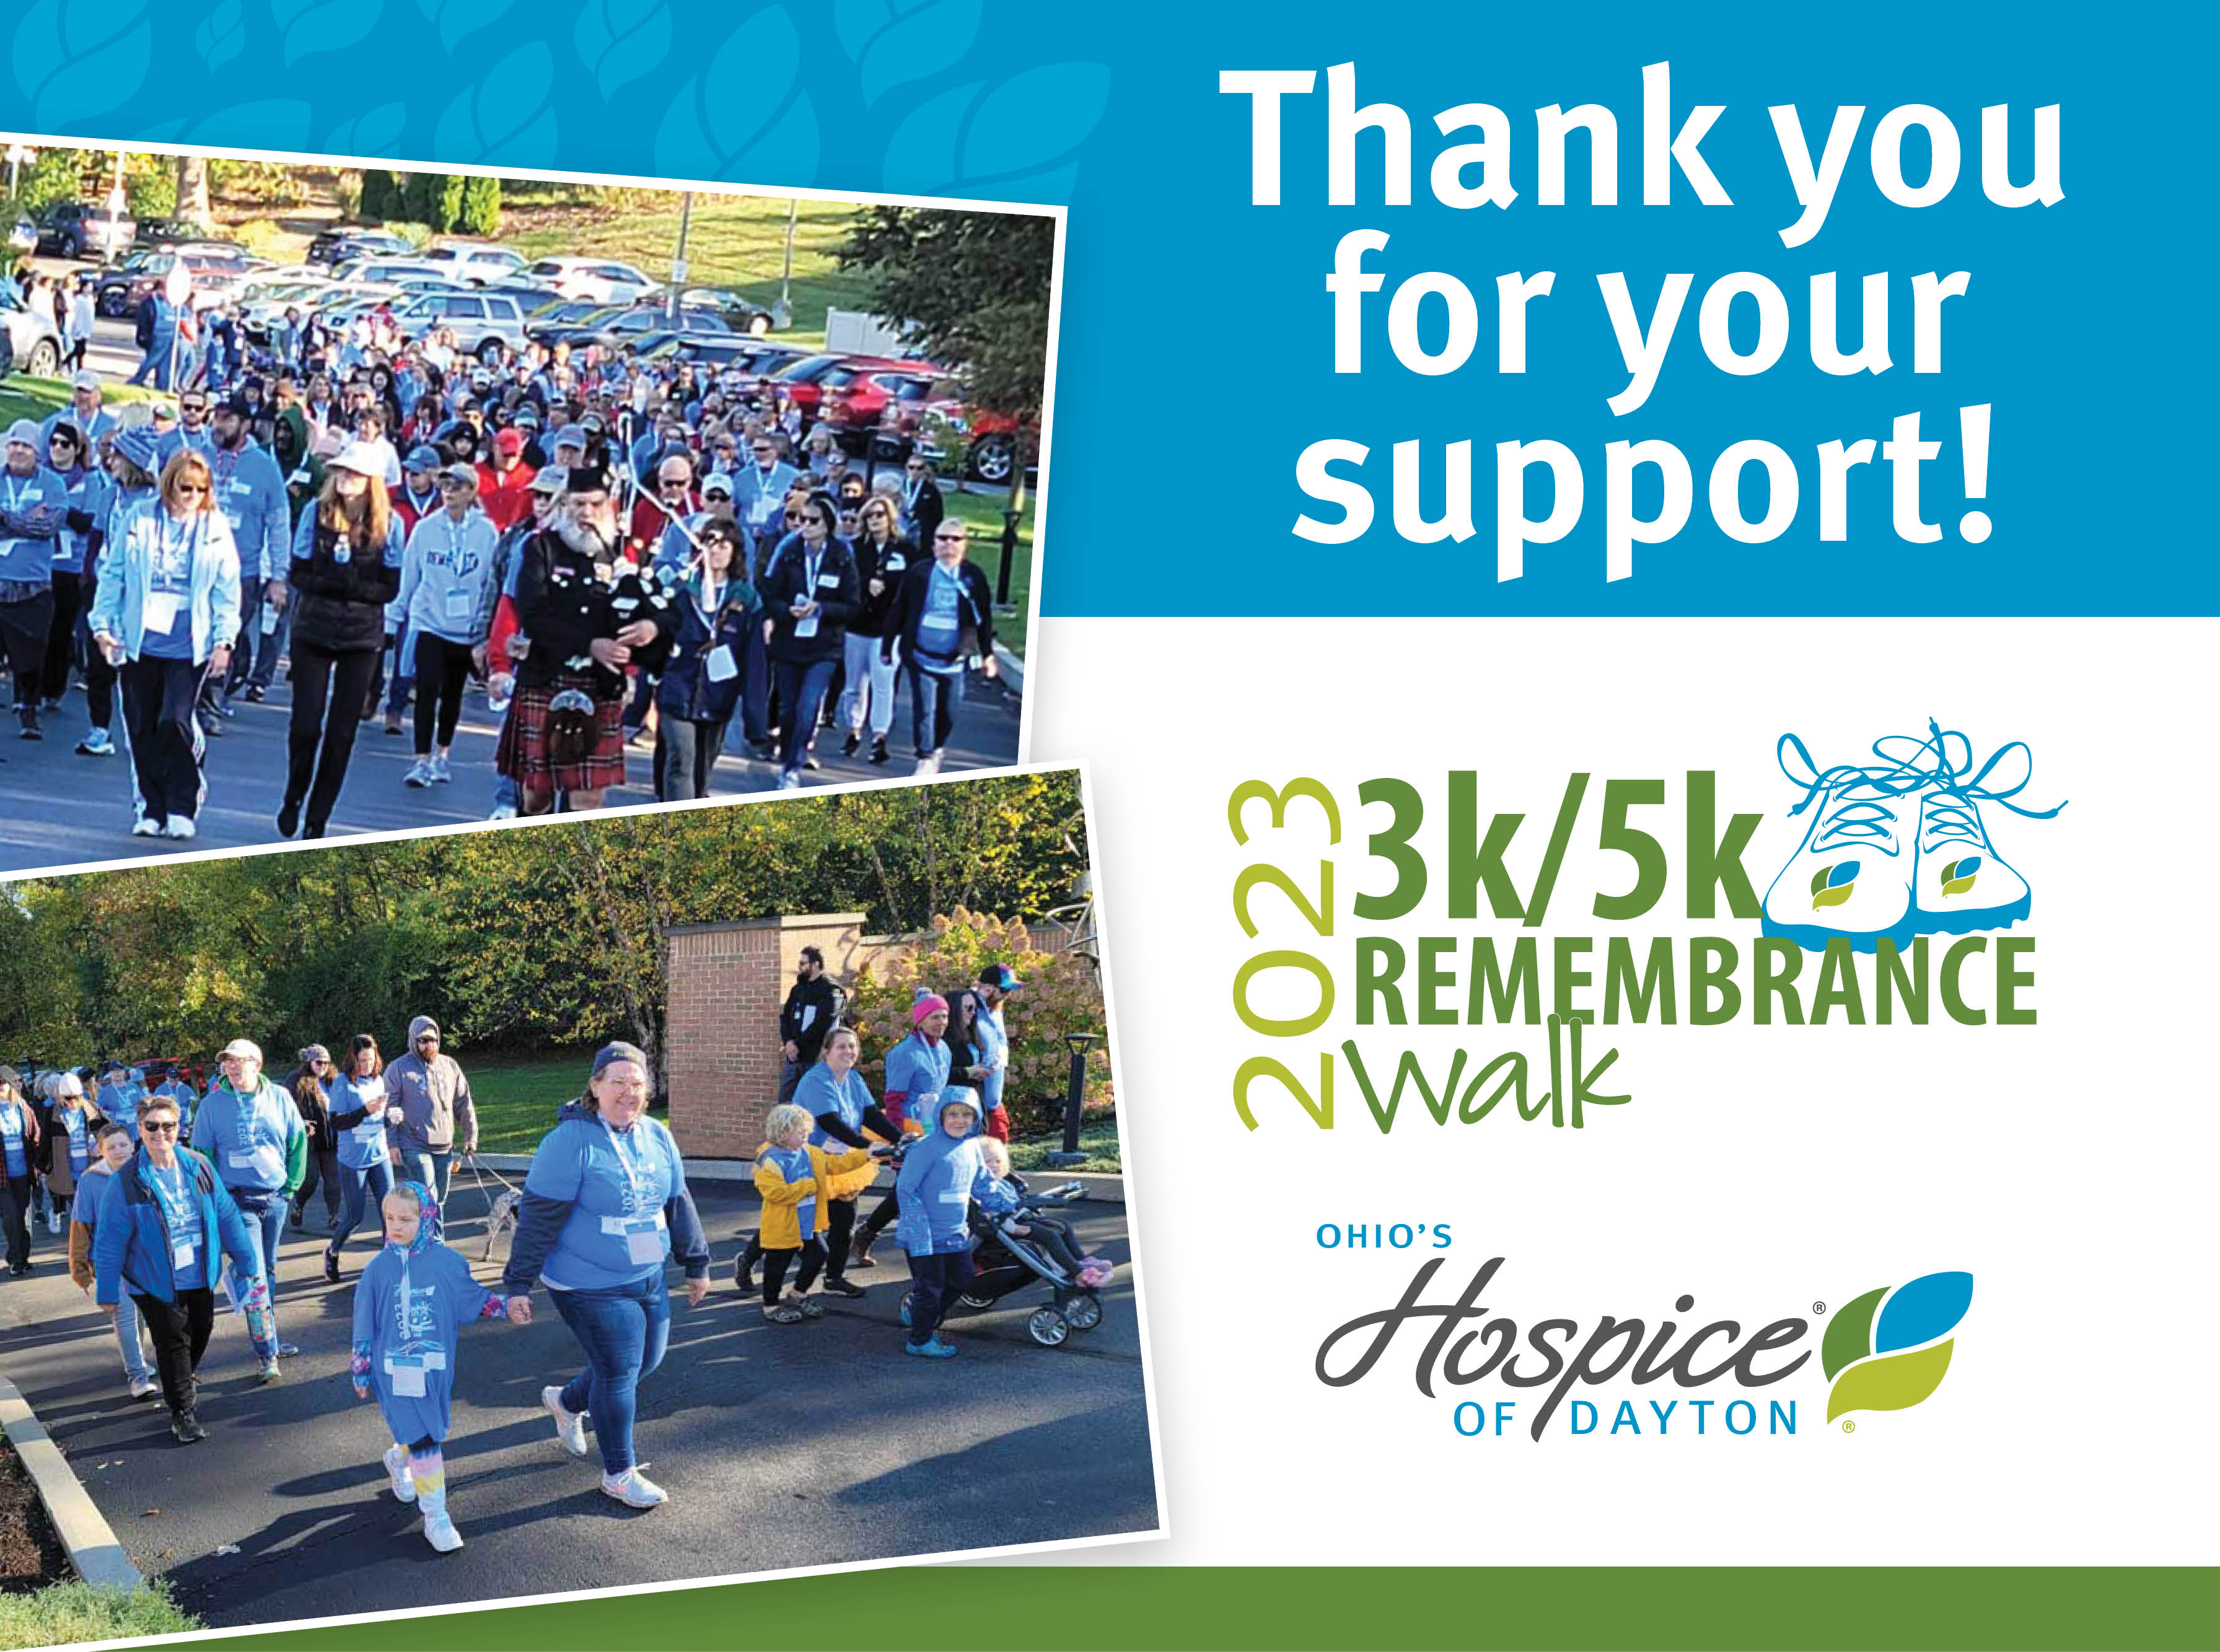 Thank you for your support. Remembrance Walk. Ohio's Hospice of Dayton